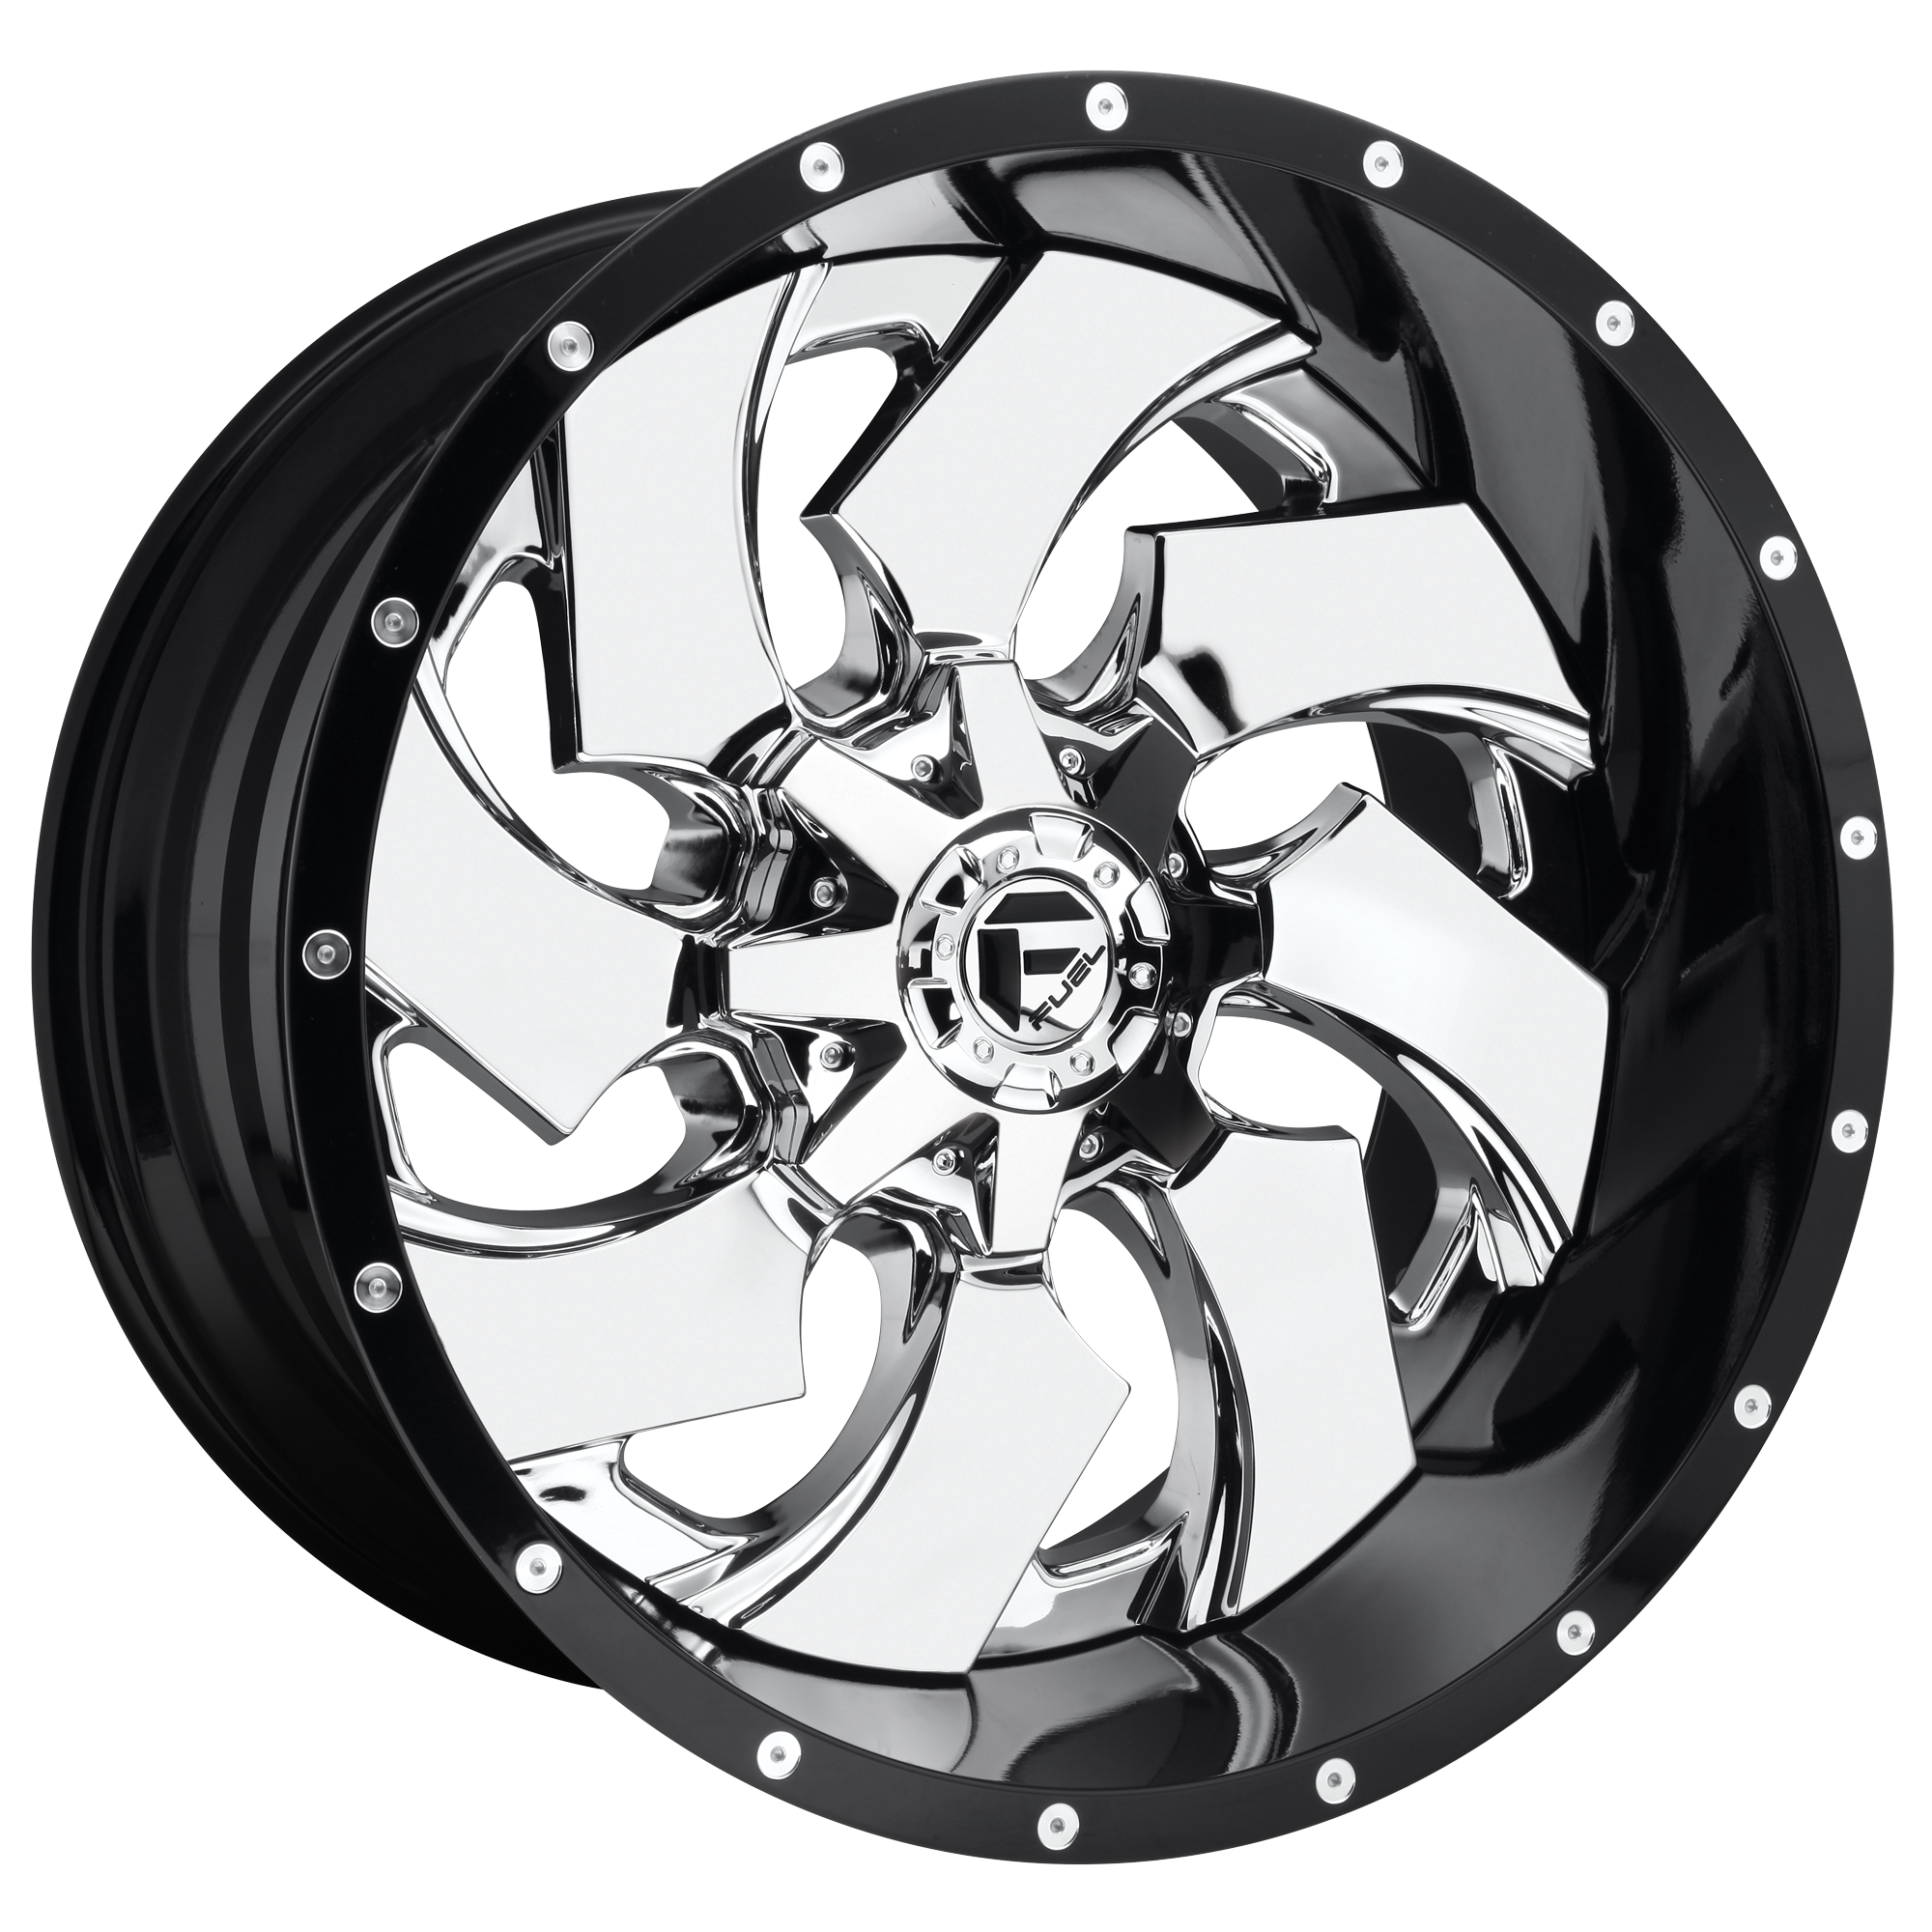 CLEAVER 20x10 8x165.10 CHROME PLATED GLOSS BLACK LIP (-19 mm) - Tires and Engine Performance